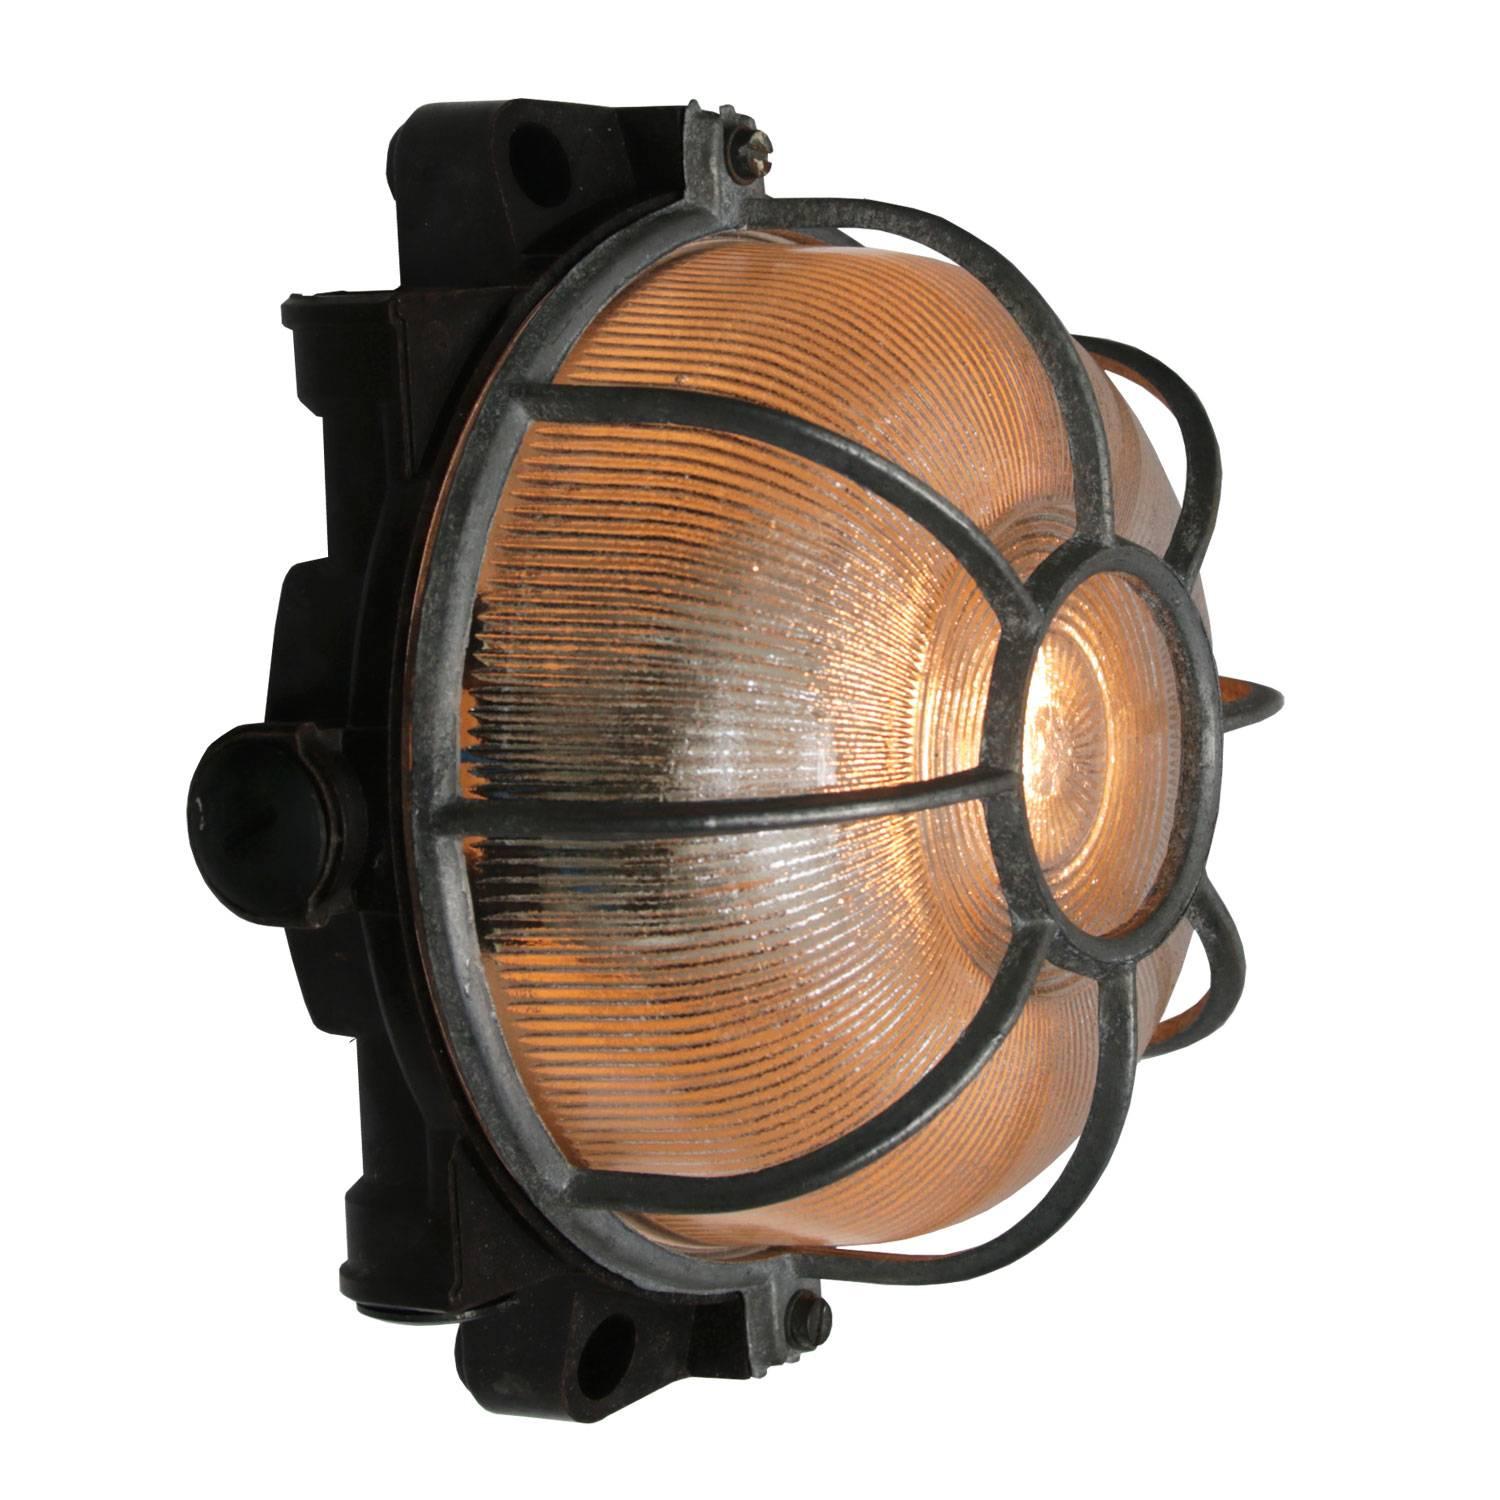 Hetes round. Industrial wall and ceiling scone. Bakelite back. Holophane striped glass.
Aluminium frame.

Measure: Weight 1.0 kg / 2.2 lb

All lamps have been made suitable by international standards for incandescent light bulbs,